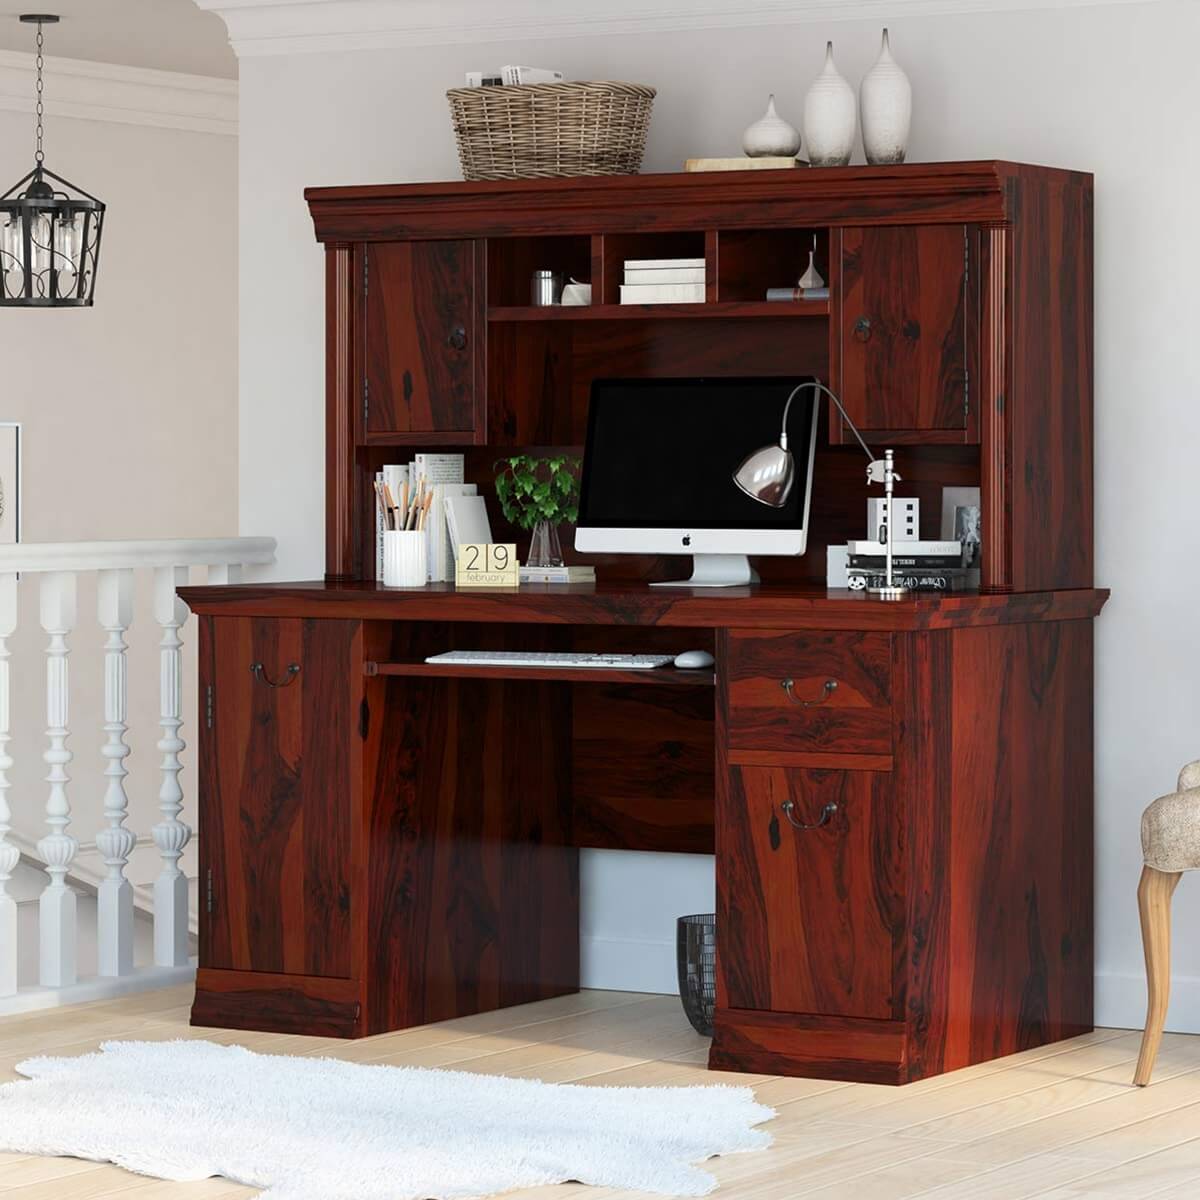 https://www.sierralivingconcepts.com/images/thumbs/0400048_brooten-rustic-solid-wood-home-office-computer-desk-with-hutch.jpeg